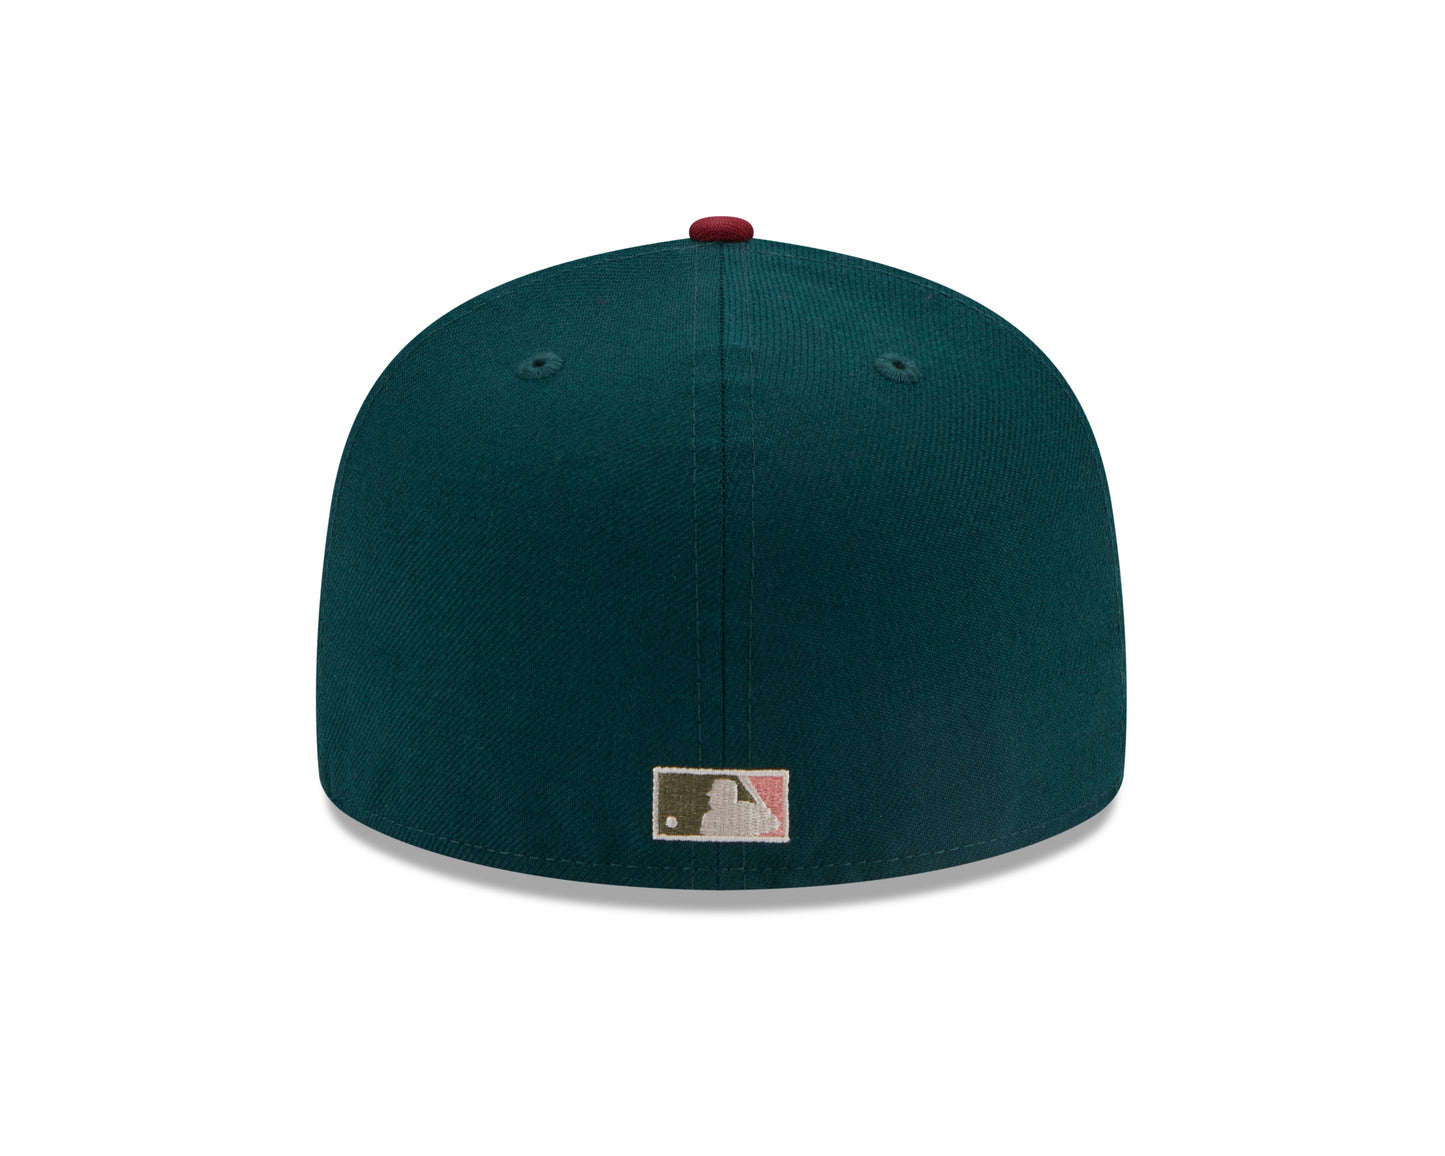 New Era - MLB WS Contrast 59Fifty Fitted - New York Yankees - Green/Red - Headz Up 